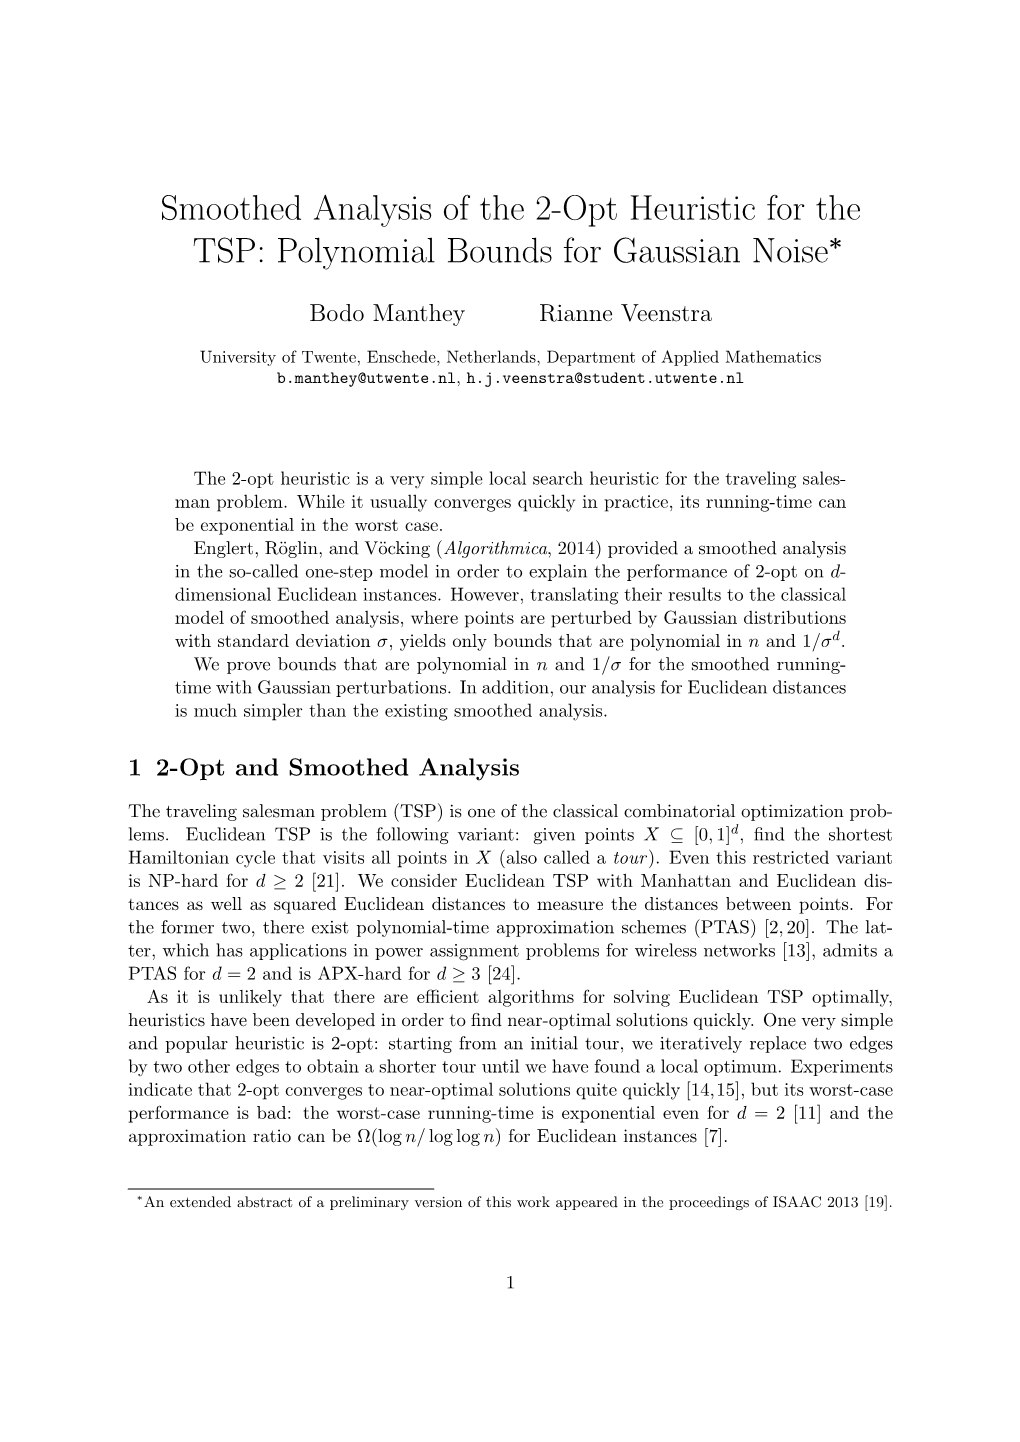 Smoothed Analysis of the 2-Opt Heuristic for the TSP: Polynomial Bounds for Gaussian Noise∗